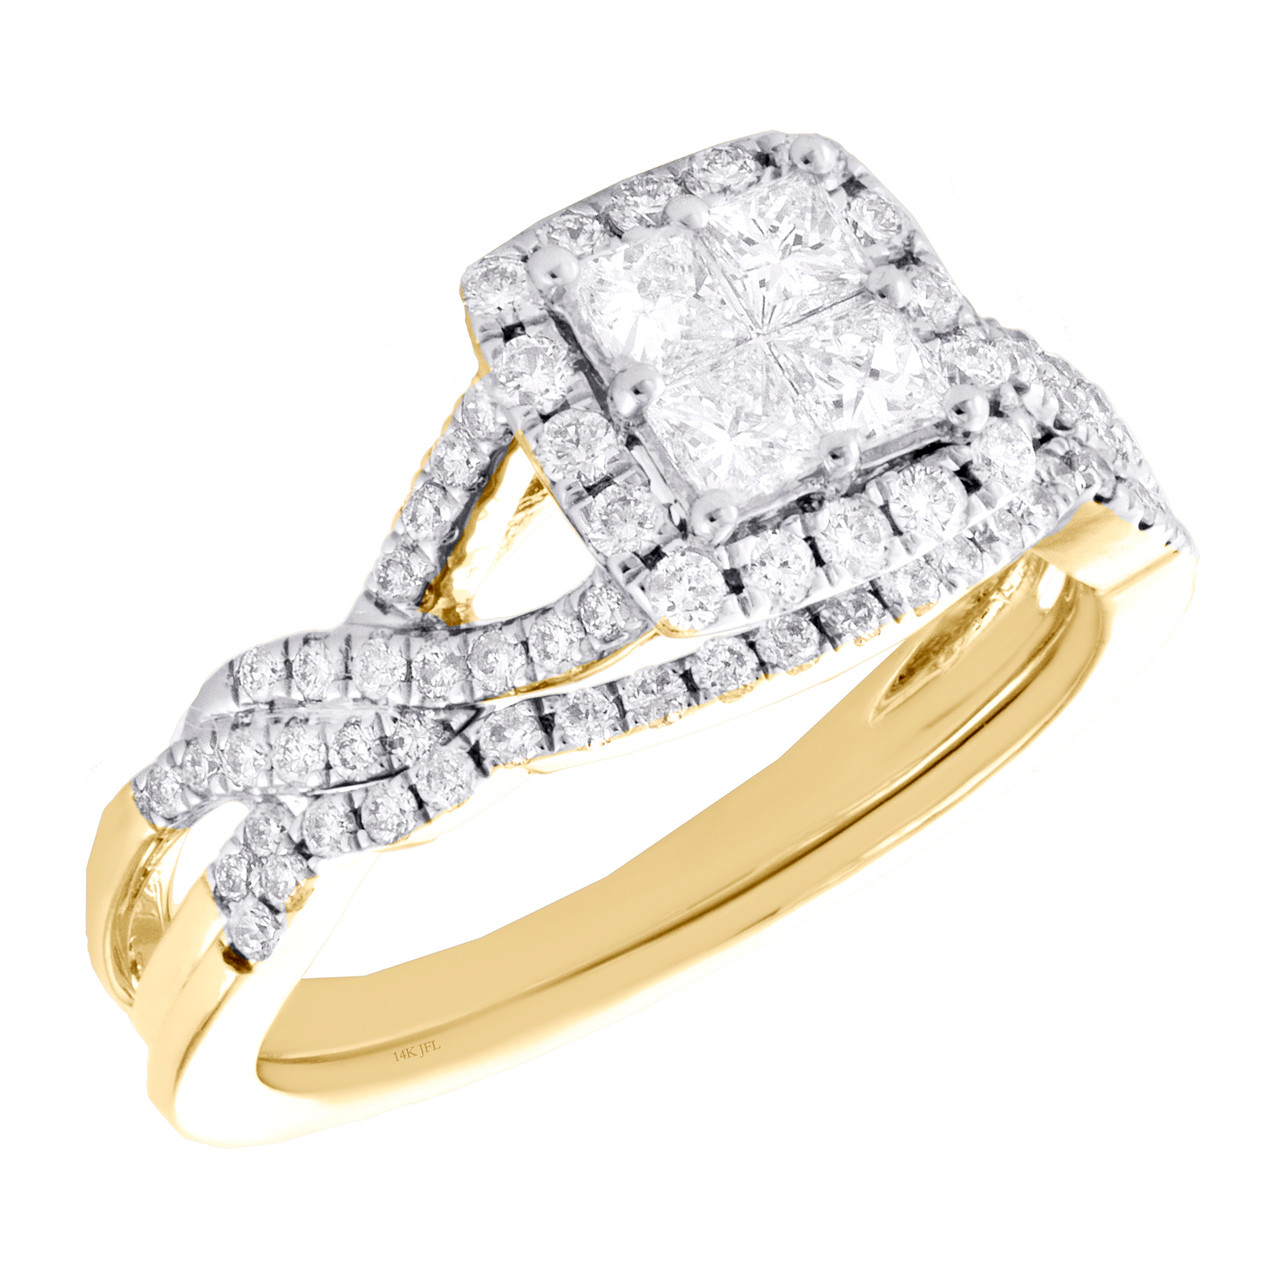 Diamond Jewelry - 1/2 CT TW Princess, Baguette and Round Diamond Quad  Engagement Ring in 14k White Gold - Discounts for Veterans, VA employees  and their families! | Veterans Canteen Service